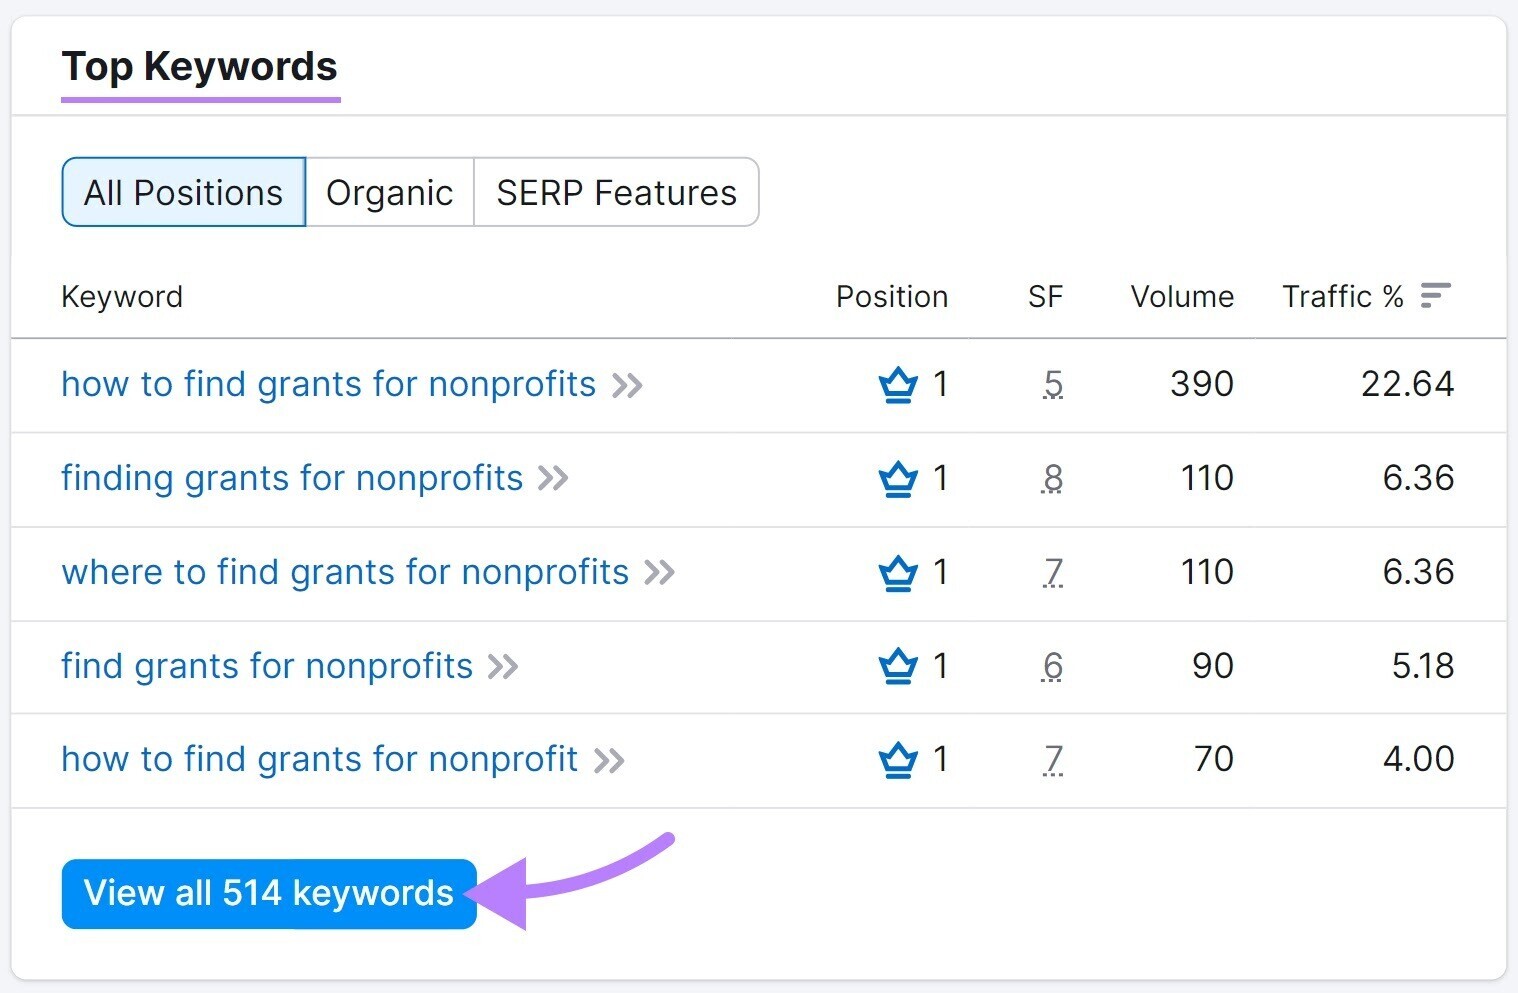 “Top Keywords” section from "Overview" dashboard